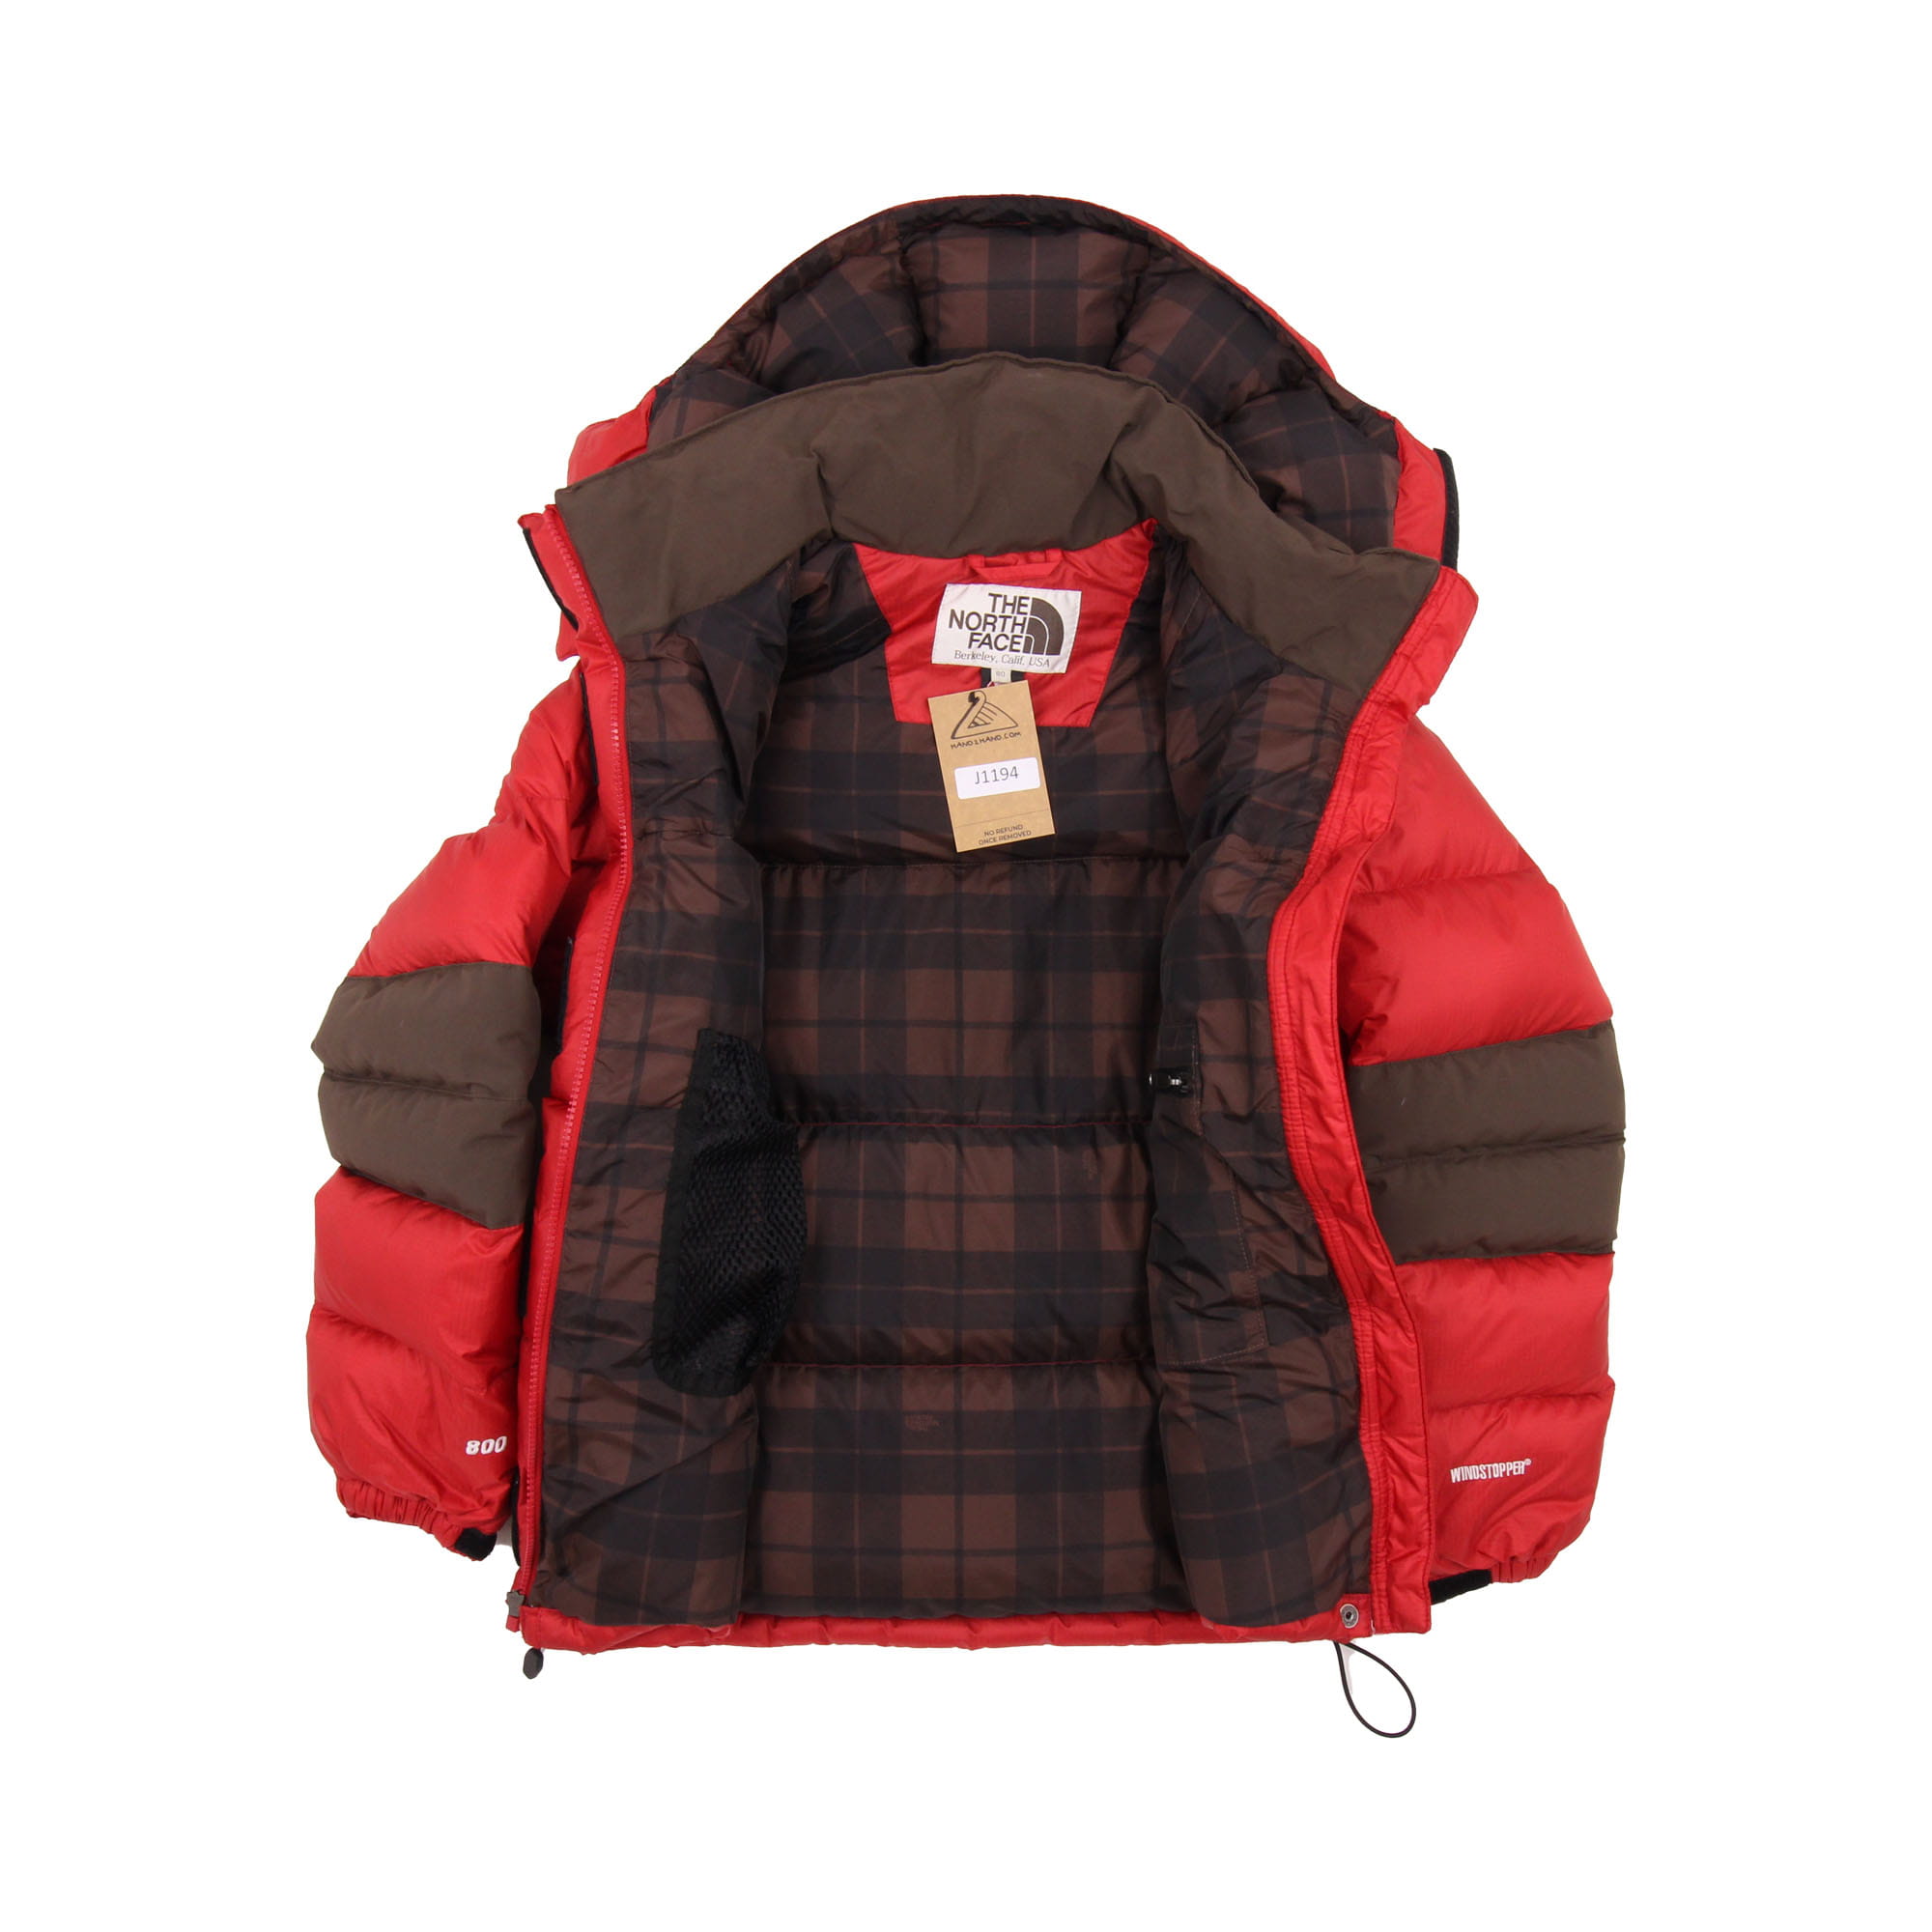 The North Face Windstopper 800 Puffer Jacket -  XS